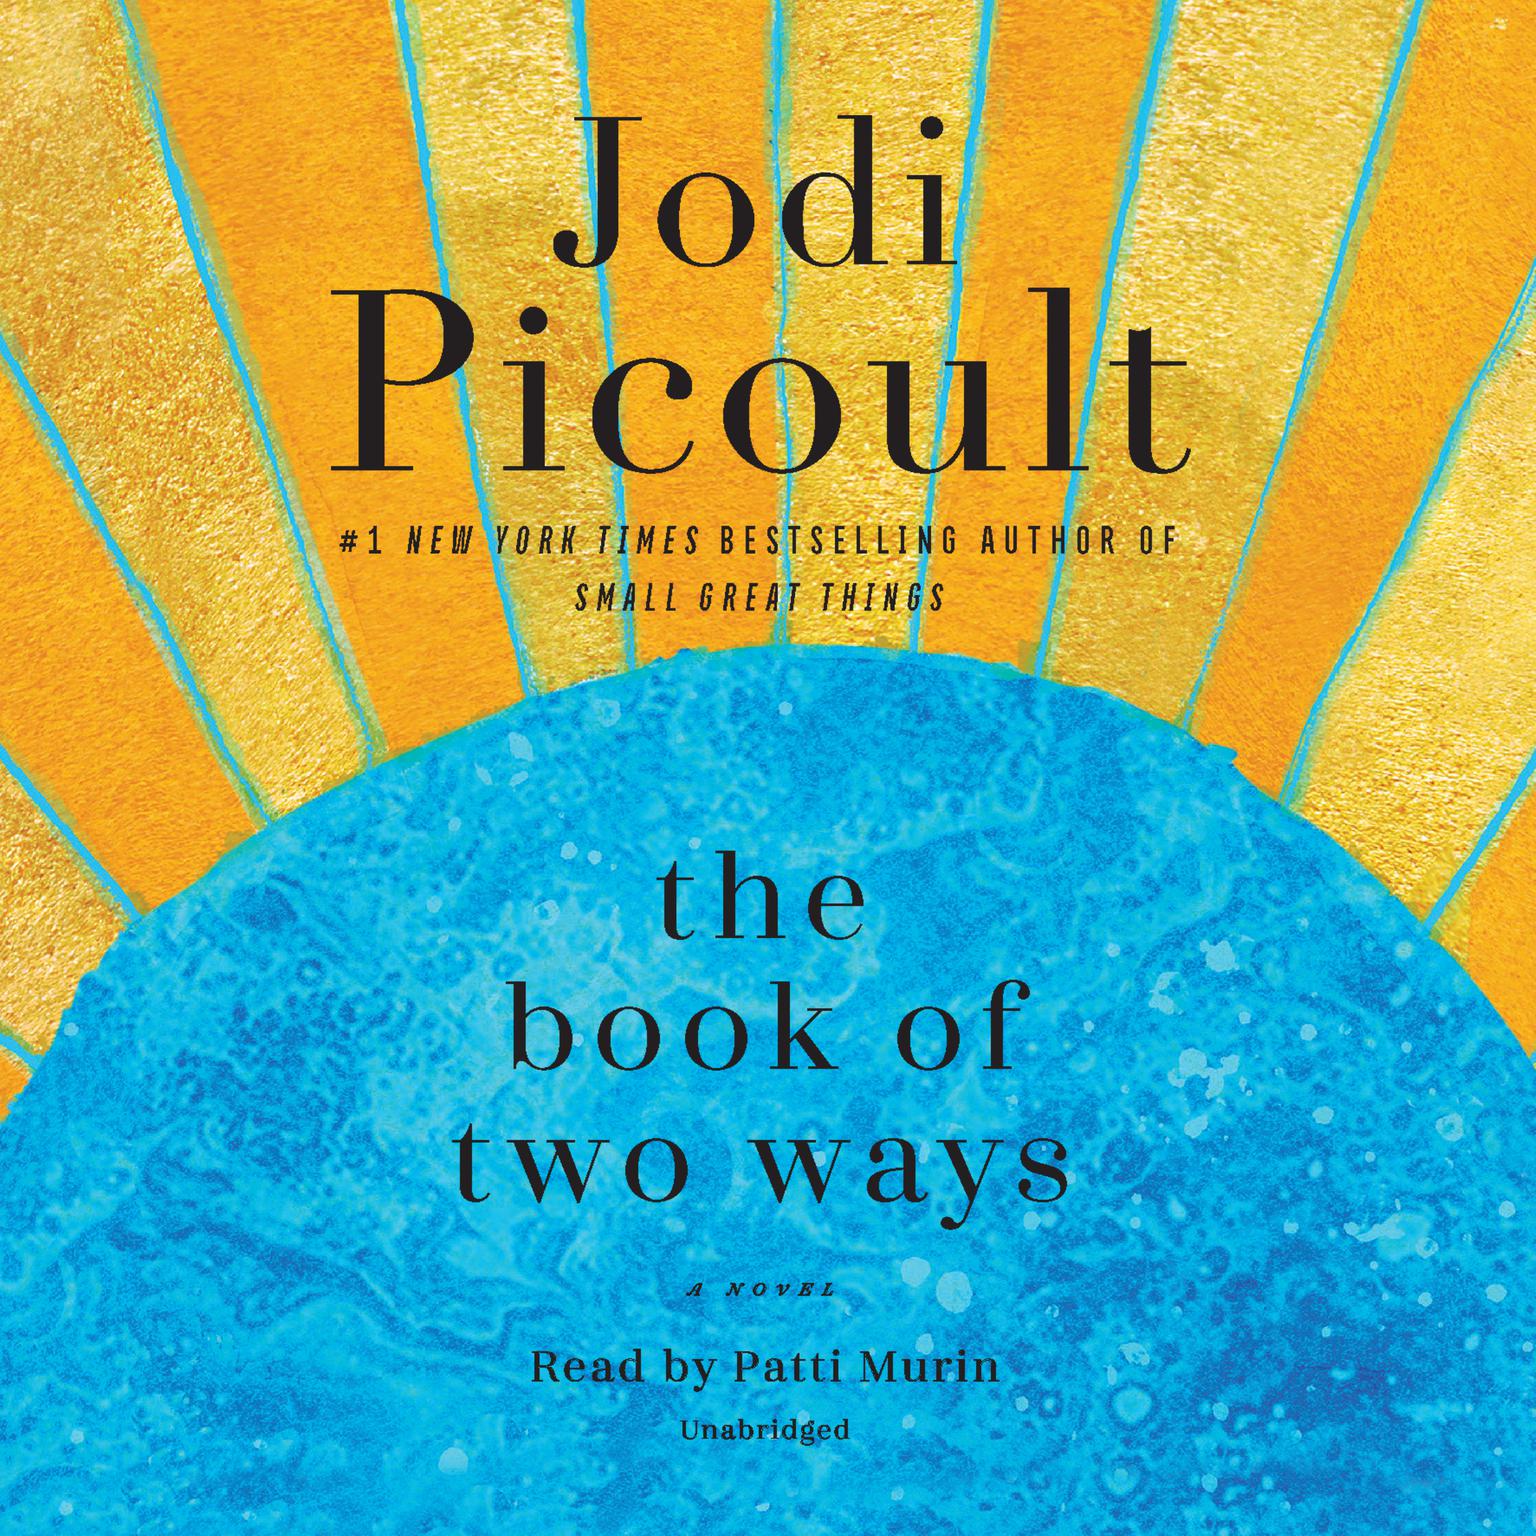 The Book of Two Ways: A Novel Audiobook, by Jodi Picoult